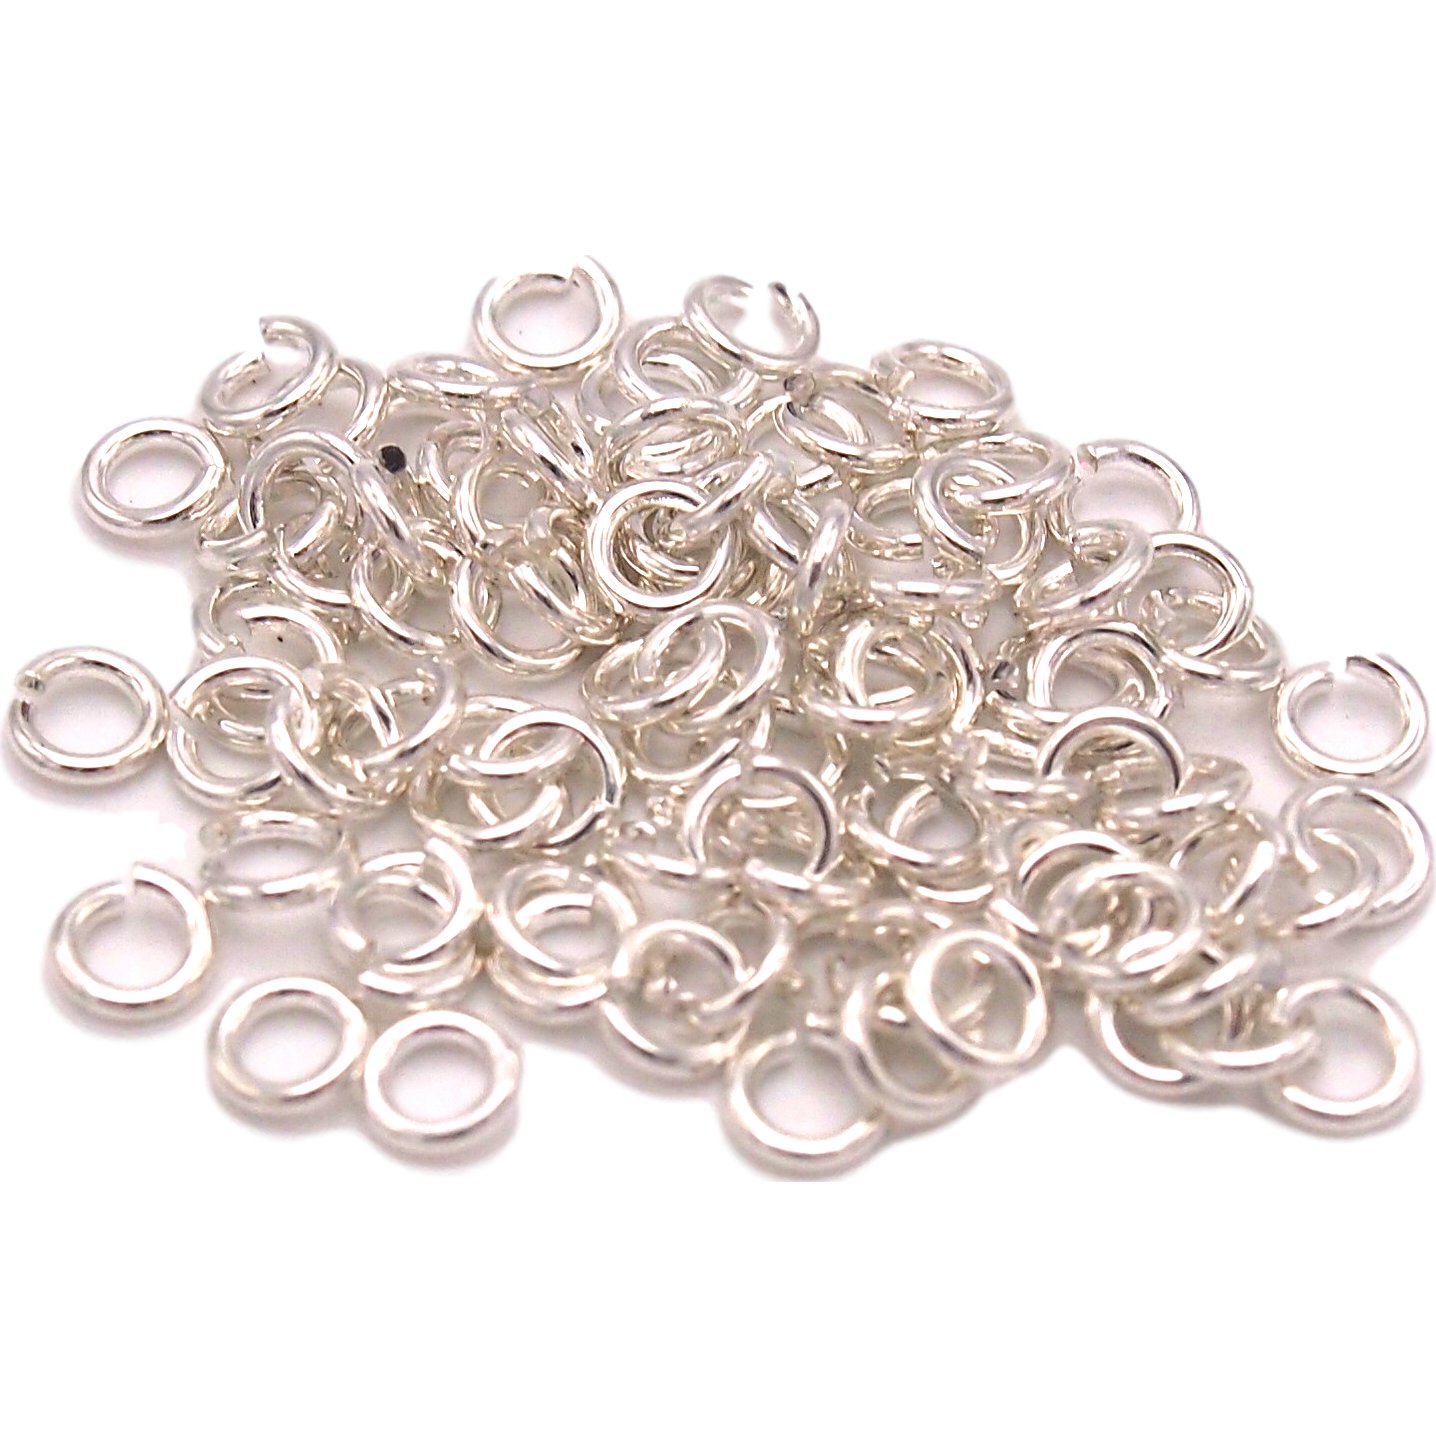 4mm Open Jump Rings 20 Gauge Silver Plated (100)